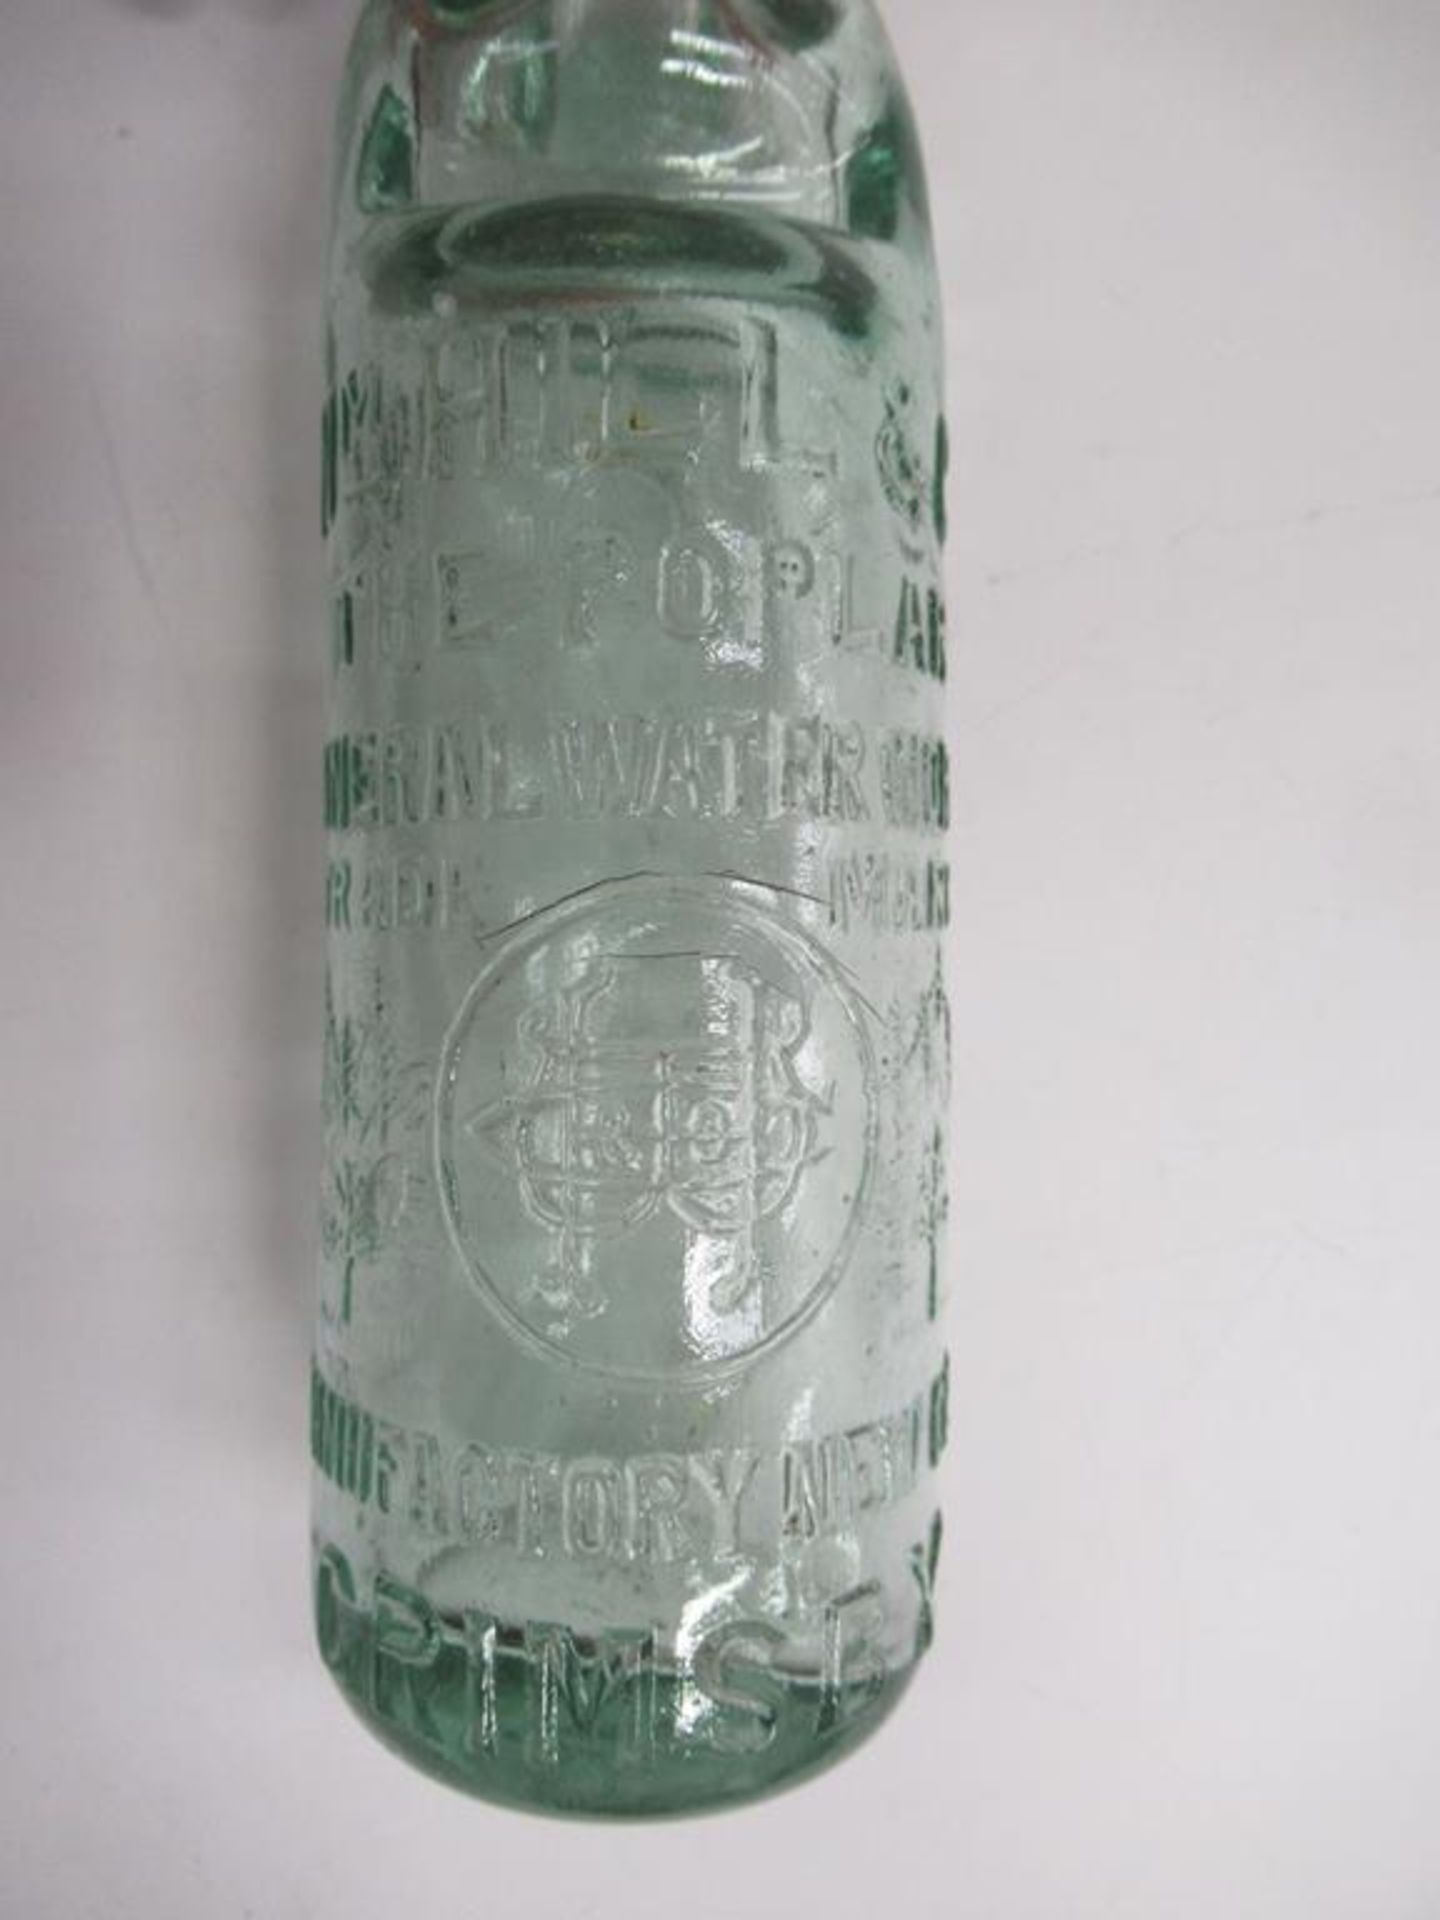 6x Grimsby W.M Hill & Co (4) and W. Hill & Son (2) Codd bottles - Image 17 of 21